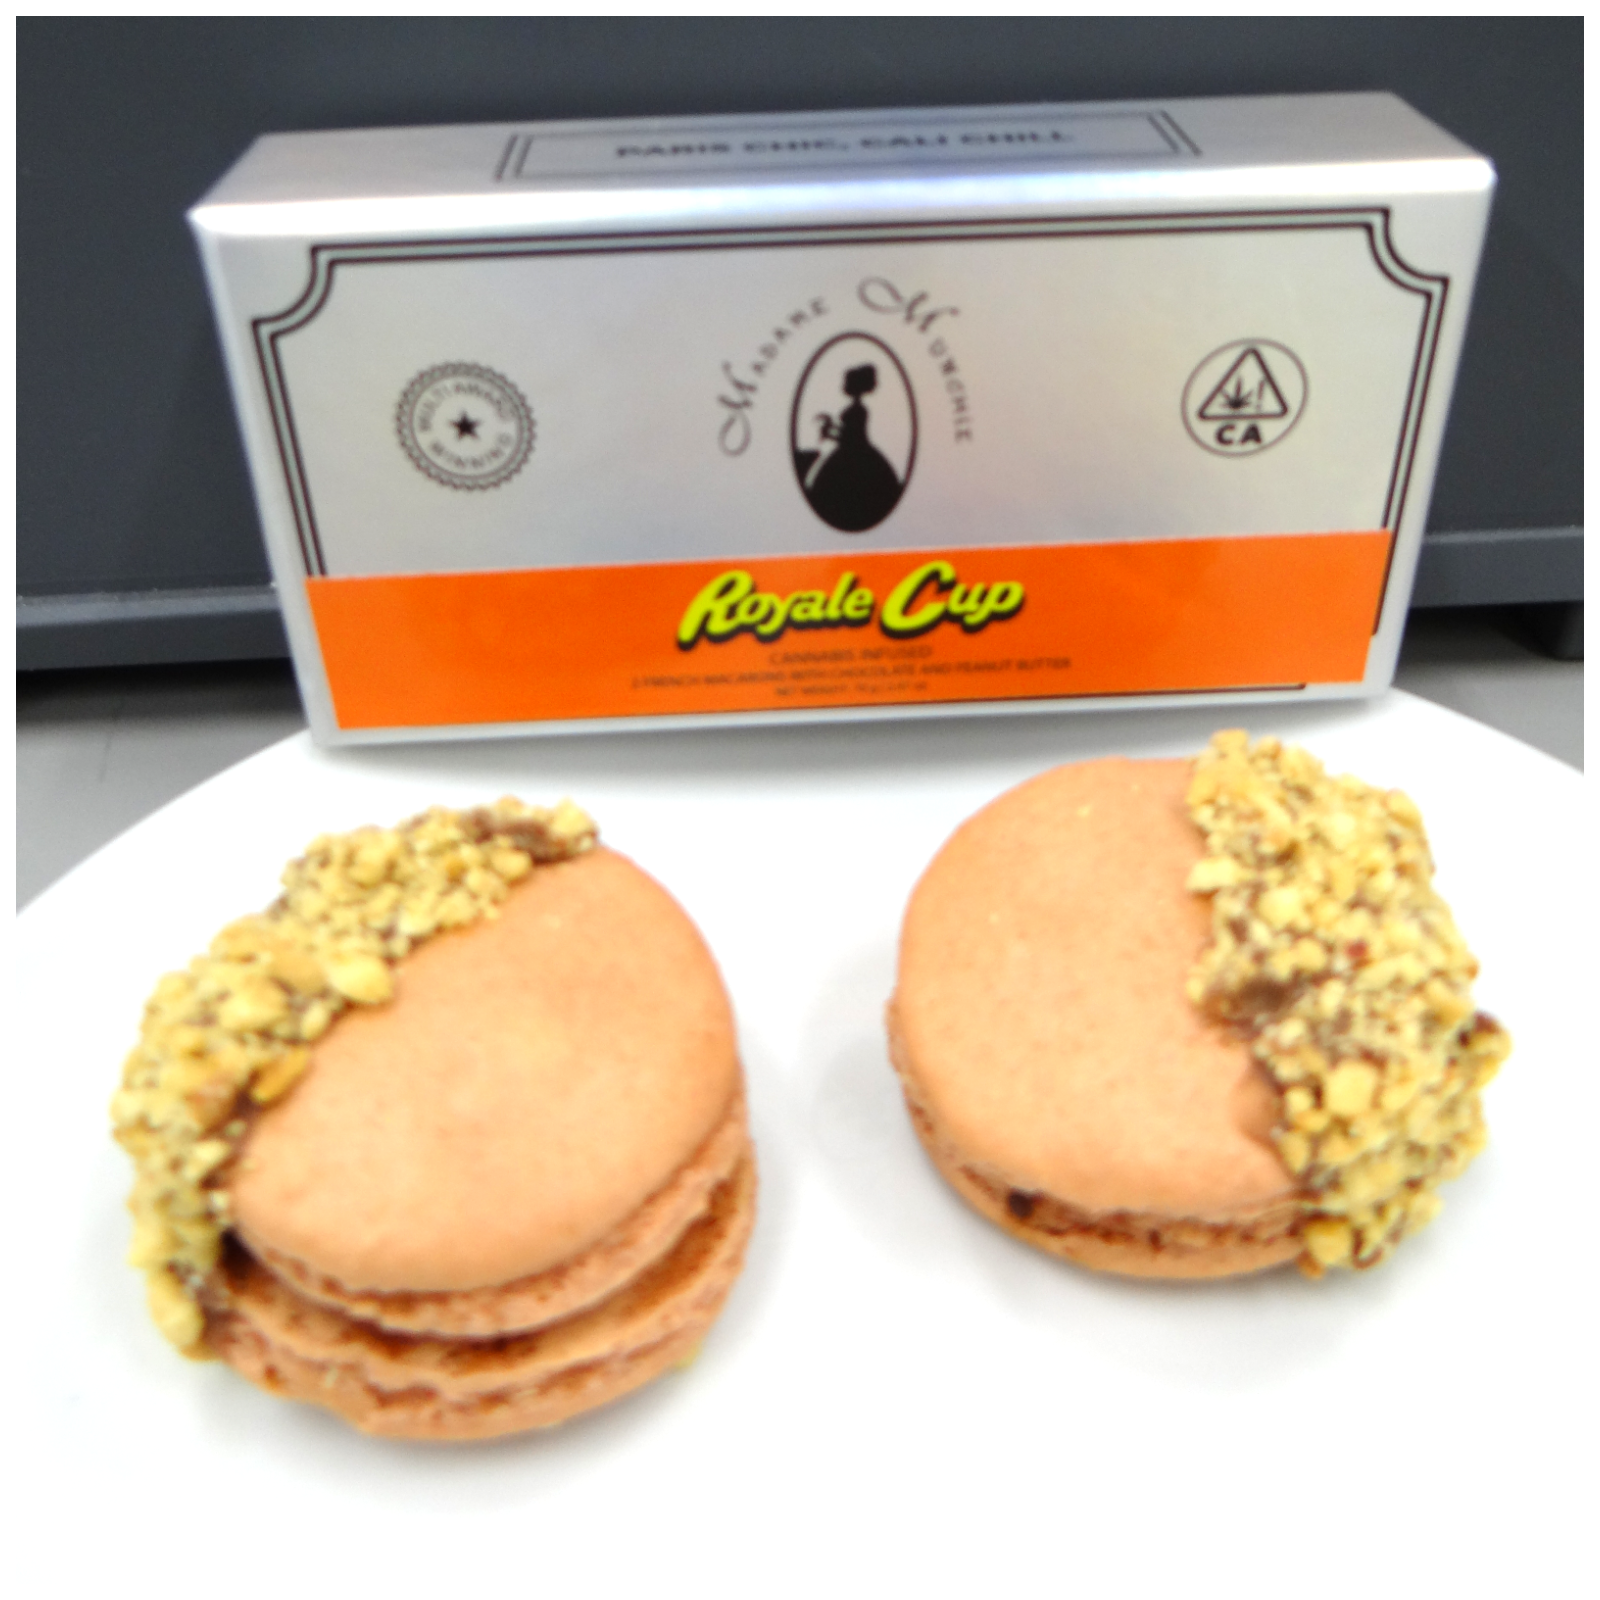 Peanut Butter Chocolate Royale Cup Macaron Cookies 100mg 2 Pack